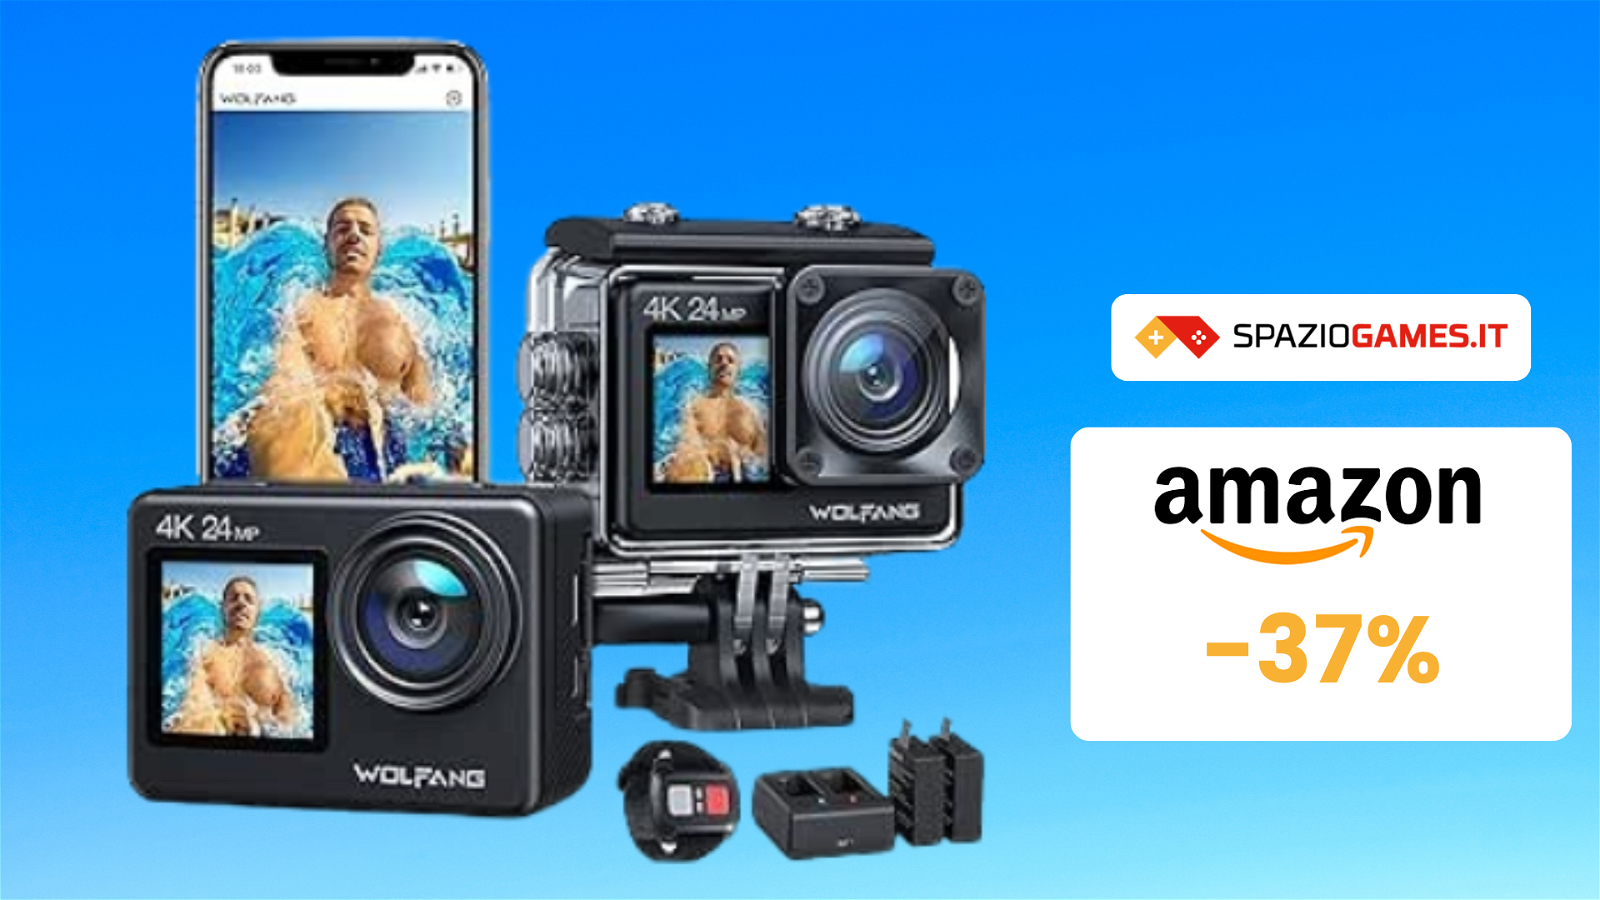 Action Cam Impermeabile Wolfang GA200 a SOLI 63€!-37%!